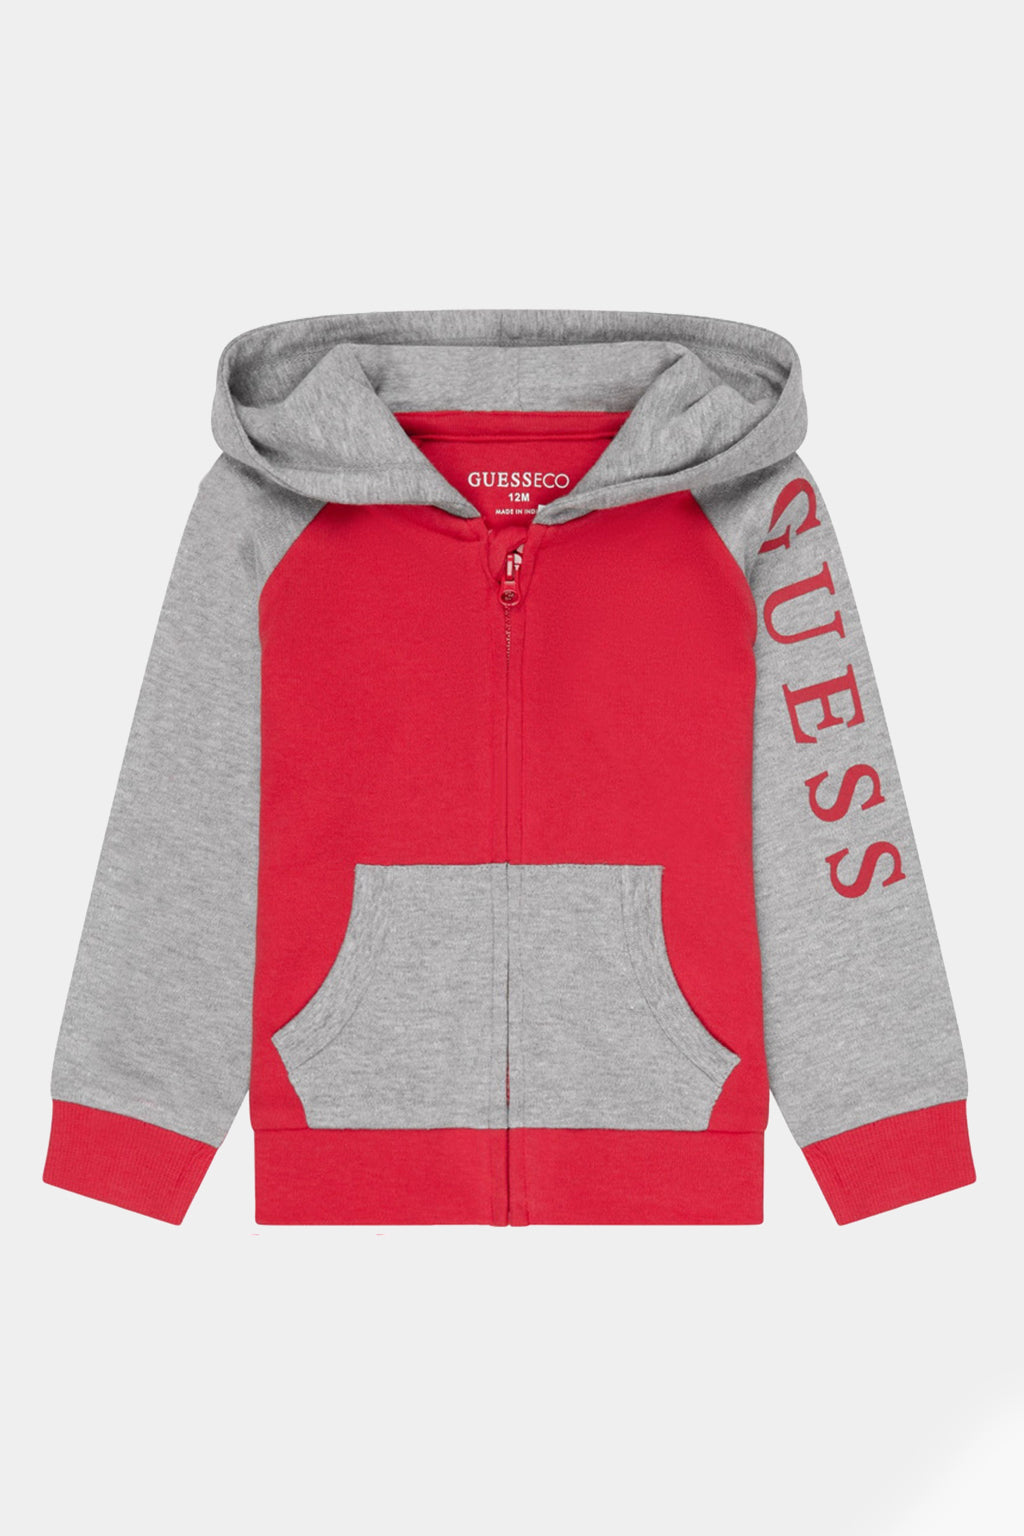 Guess - All Over Logo Jacket, Body and Pant